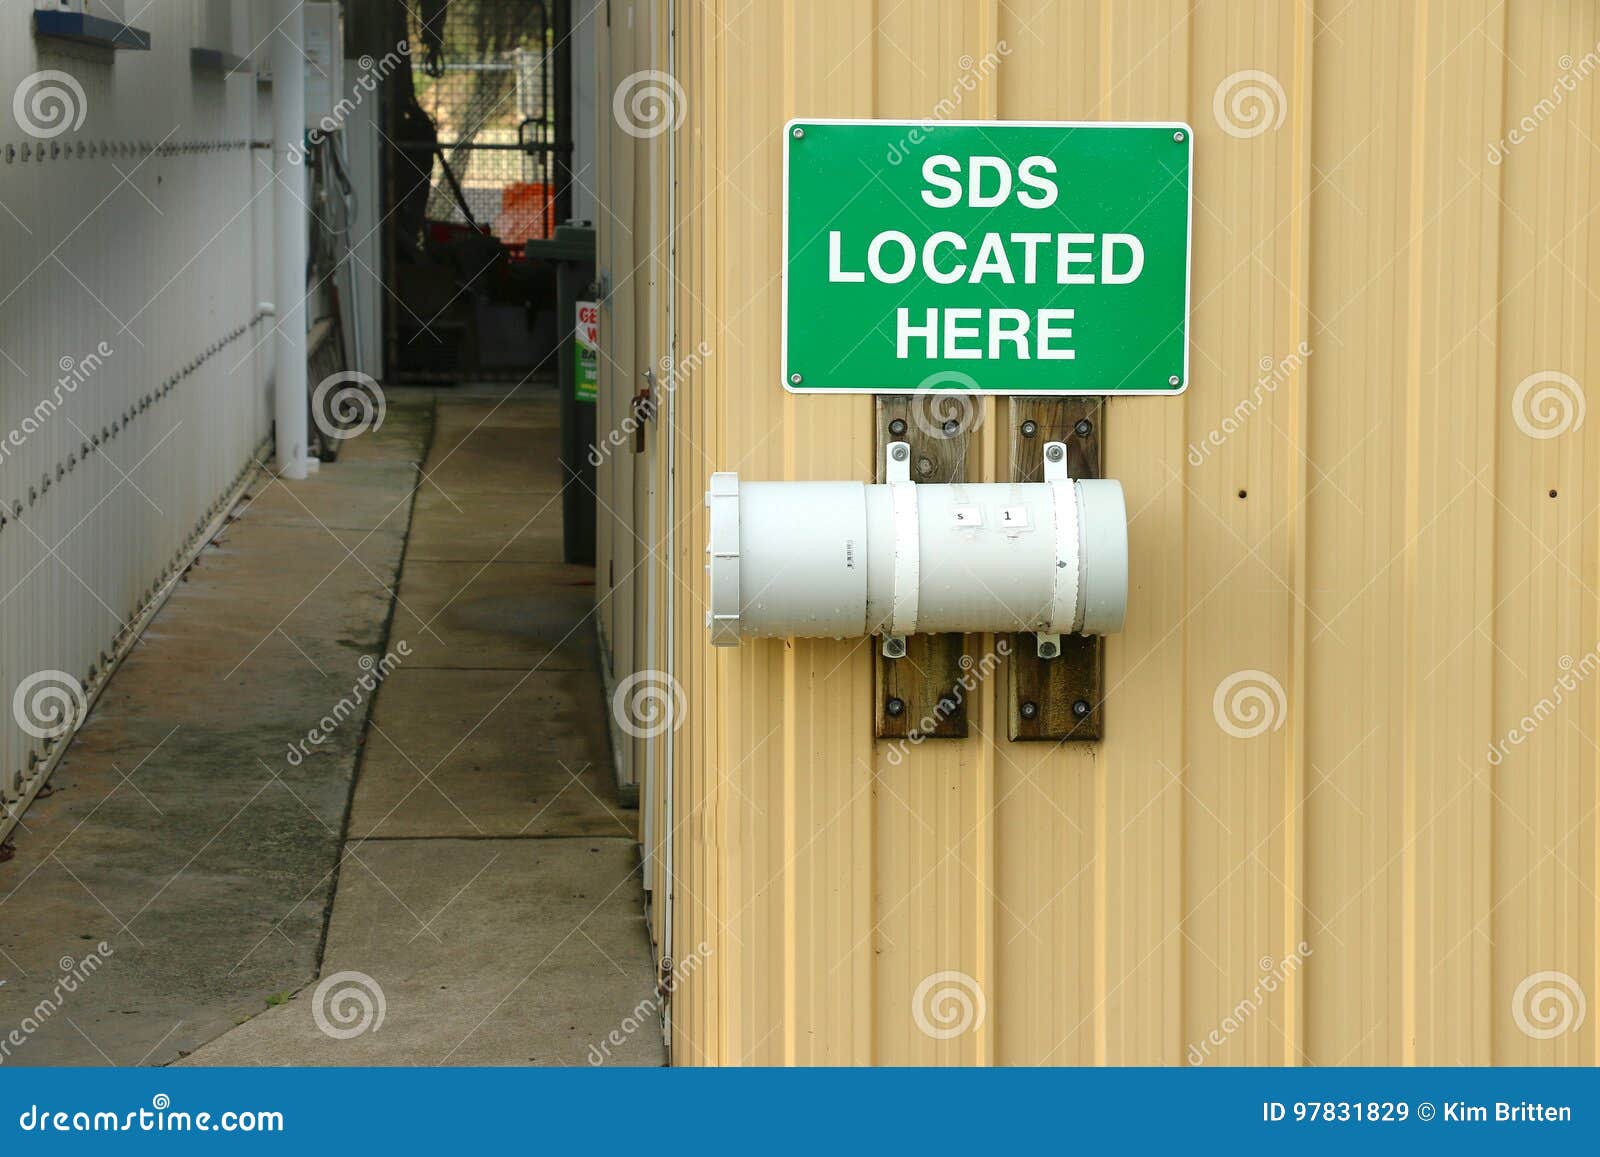 Green and White SDS Located Here Sign Stock Image - Image of located